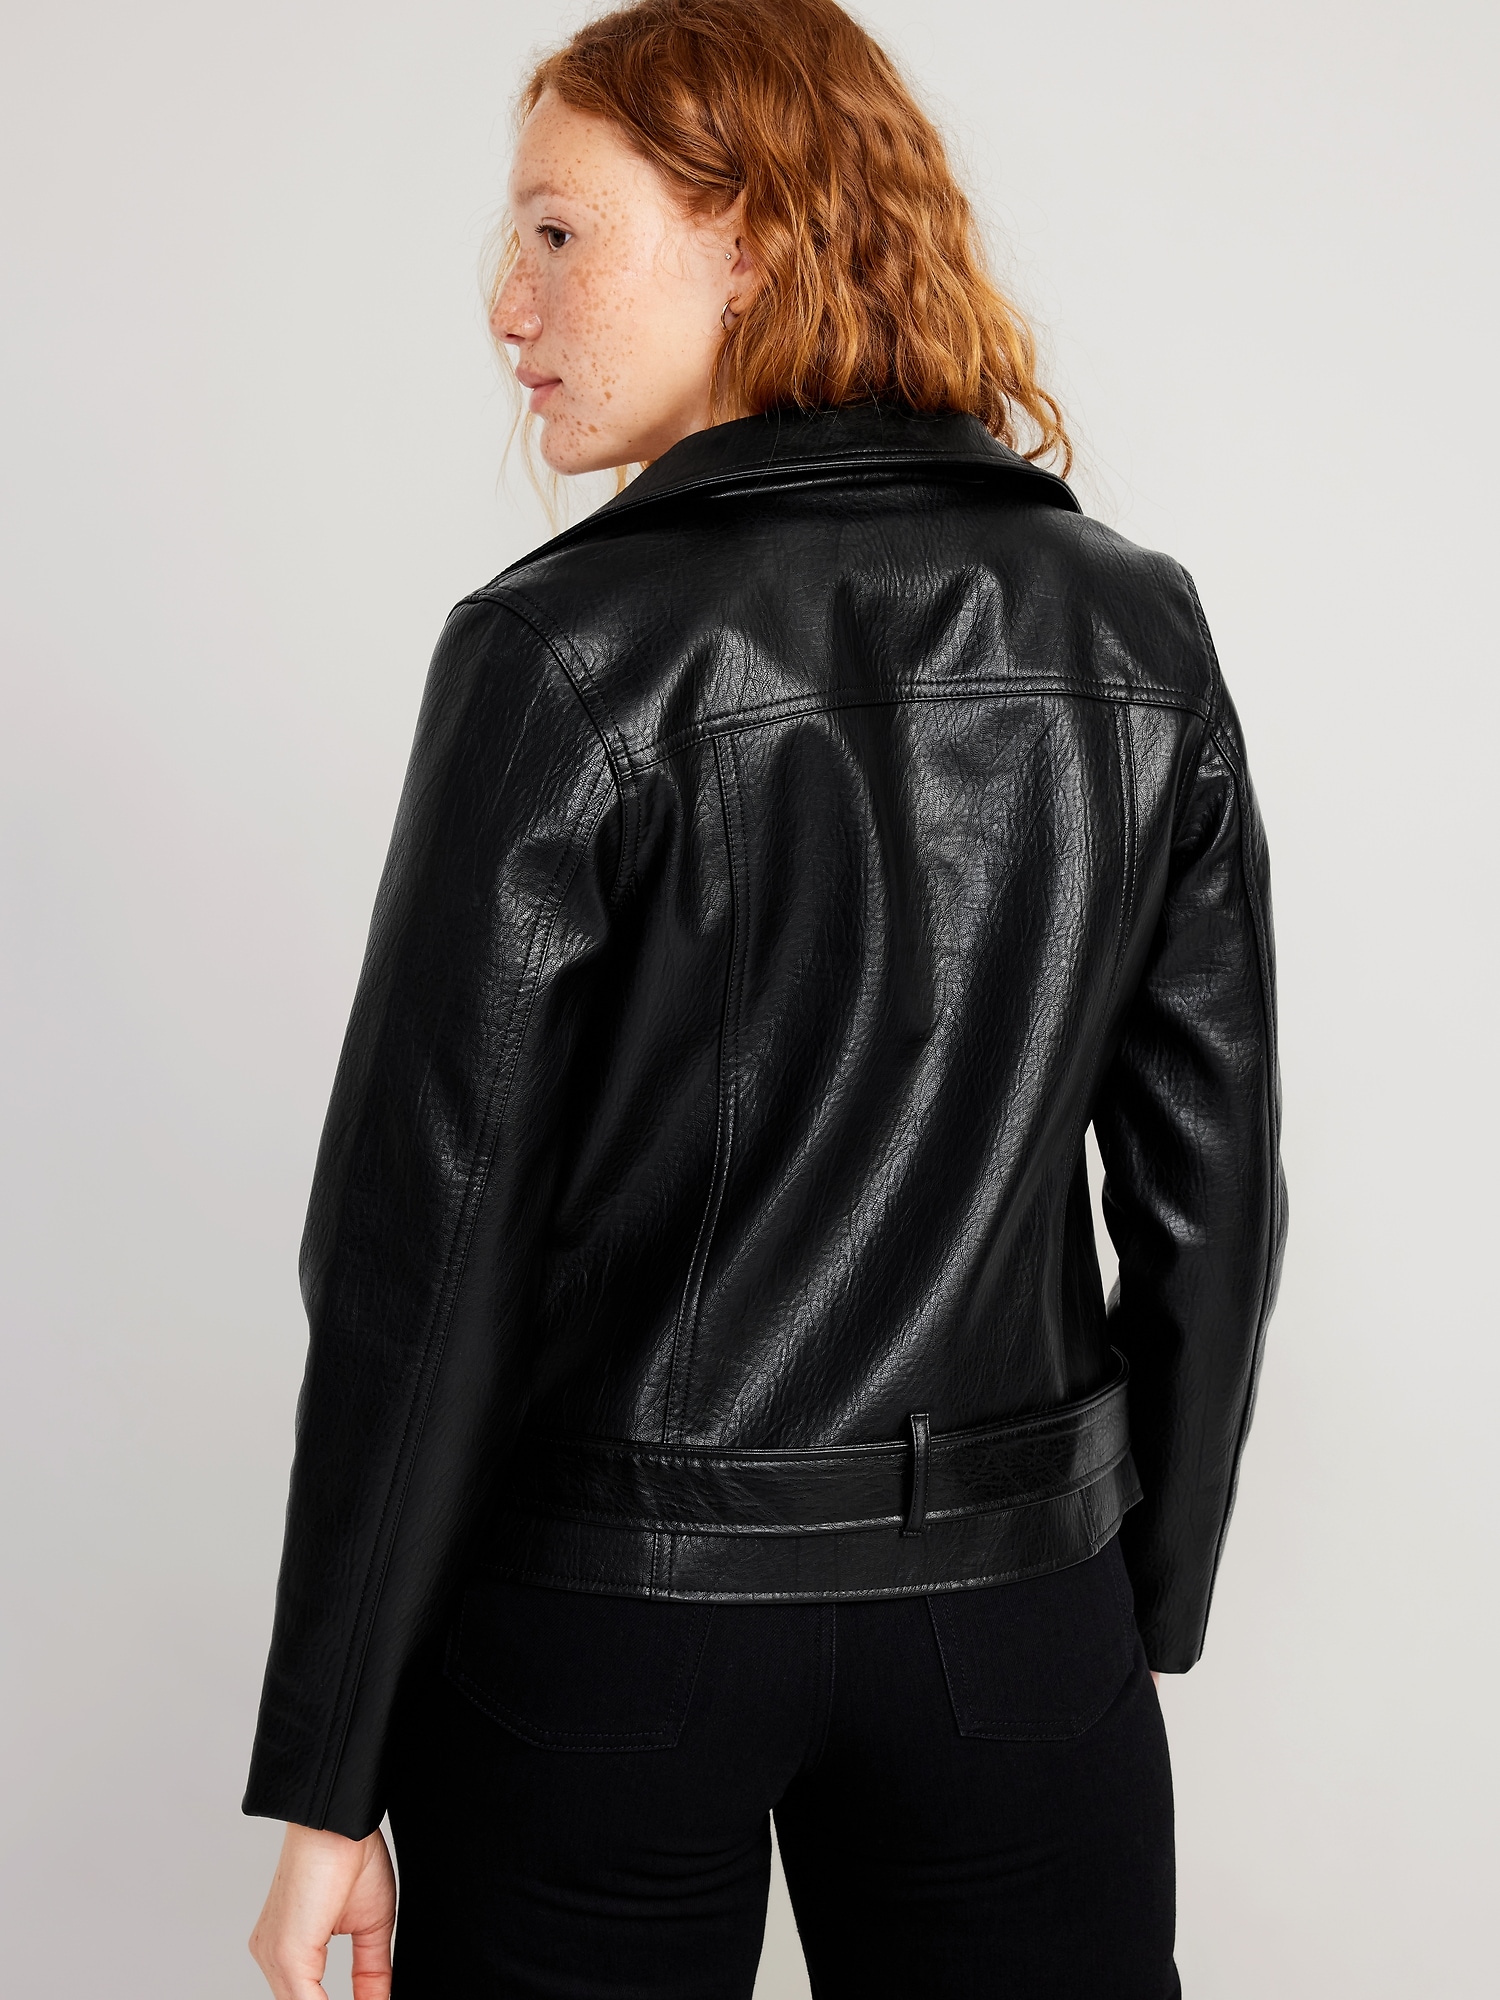 Old Navy Women's Faux-Leather Bomber Jacket